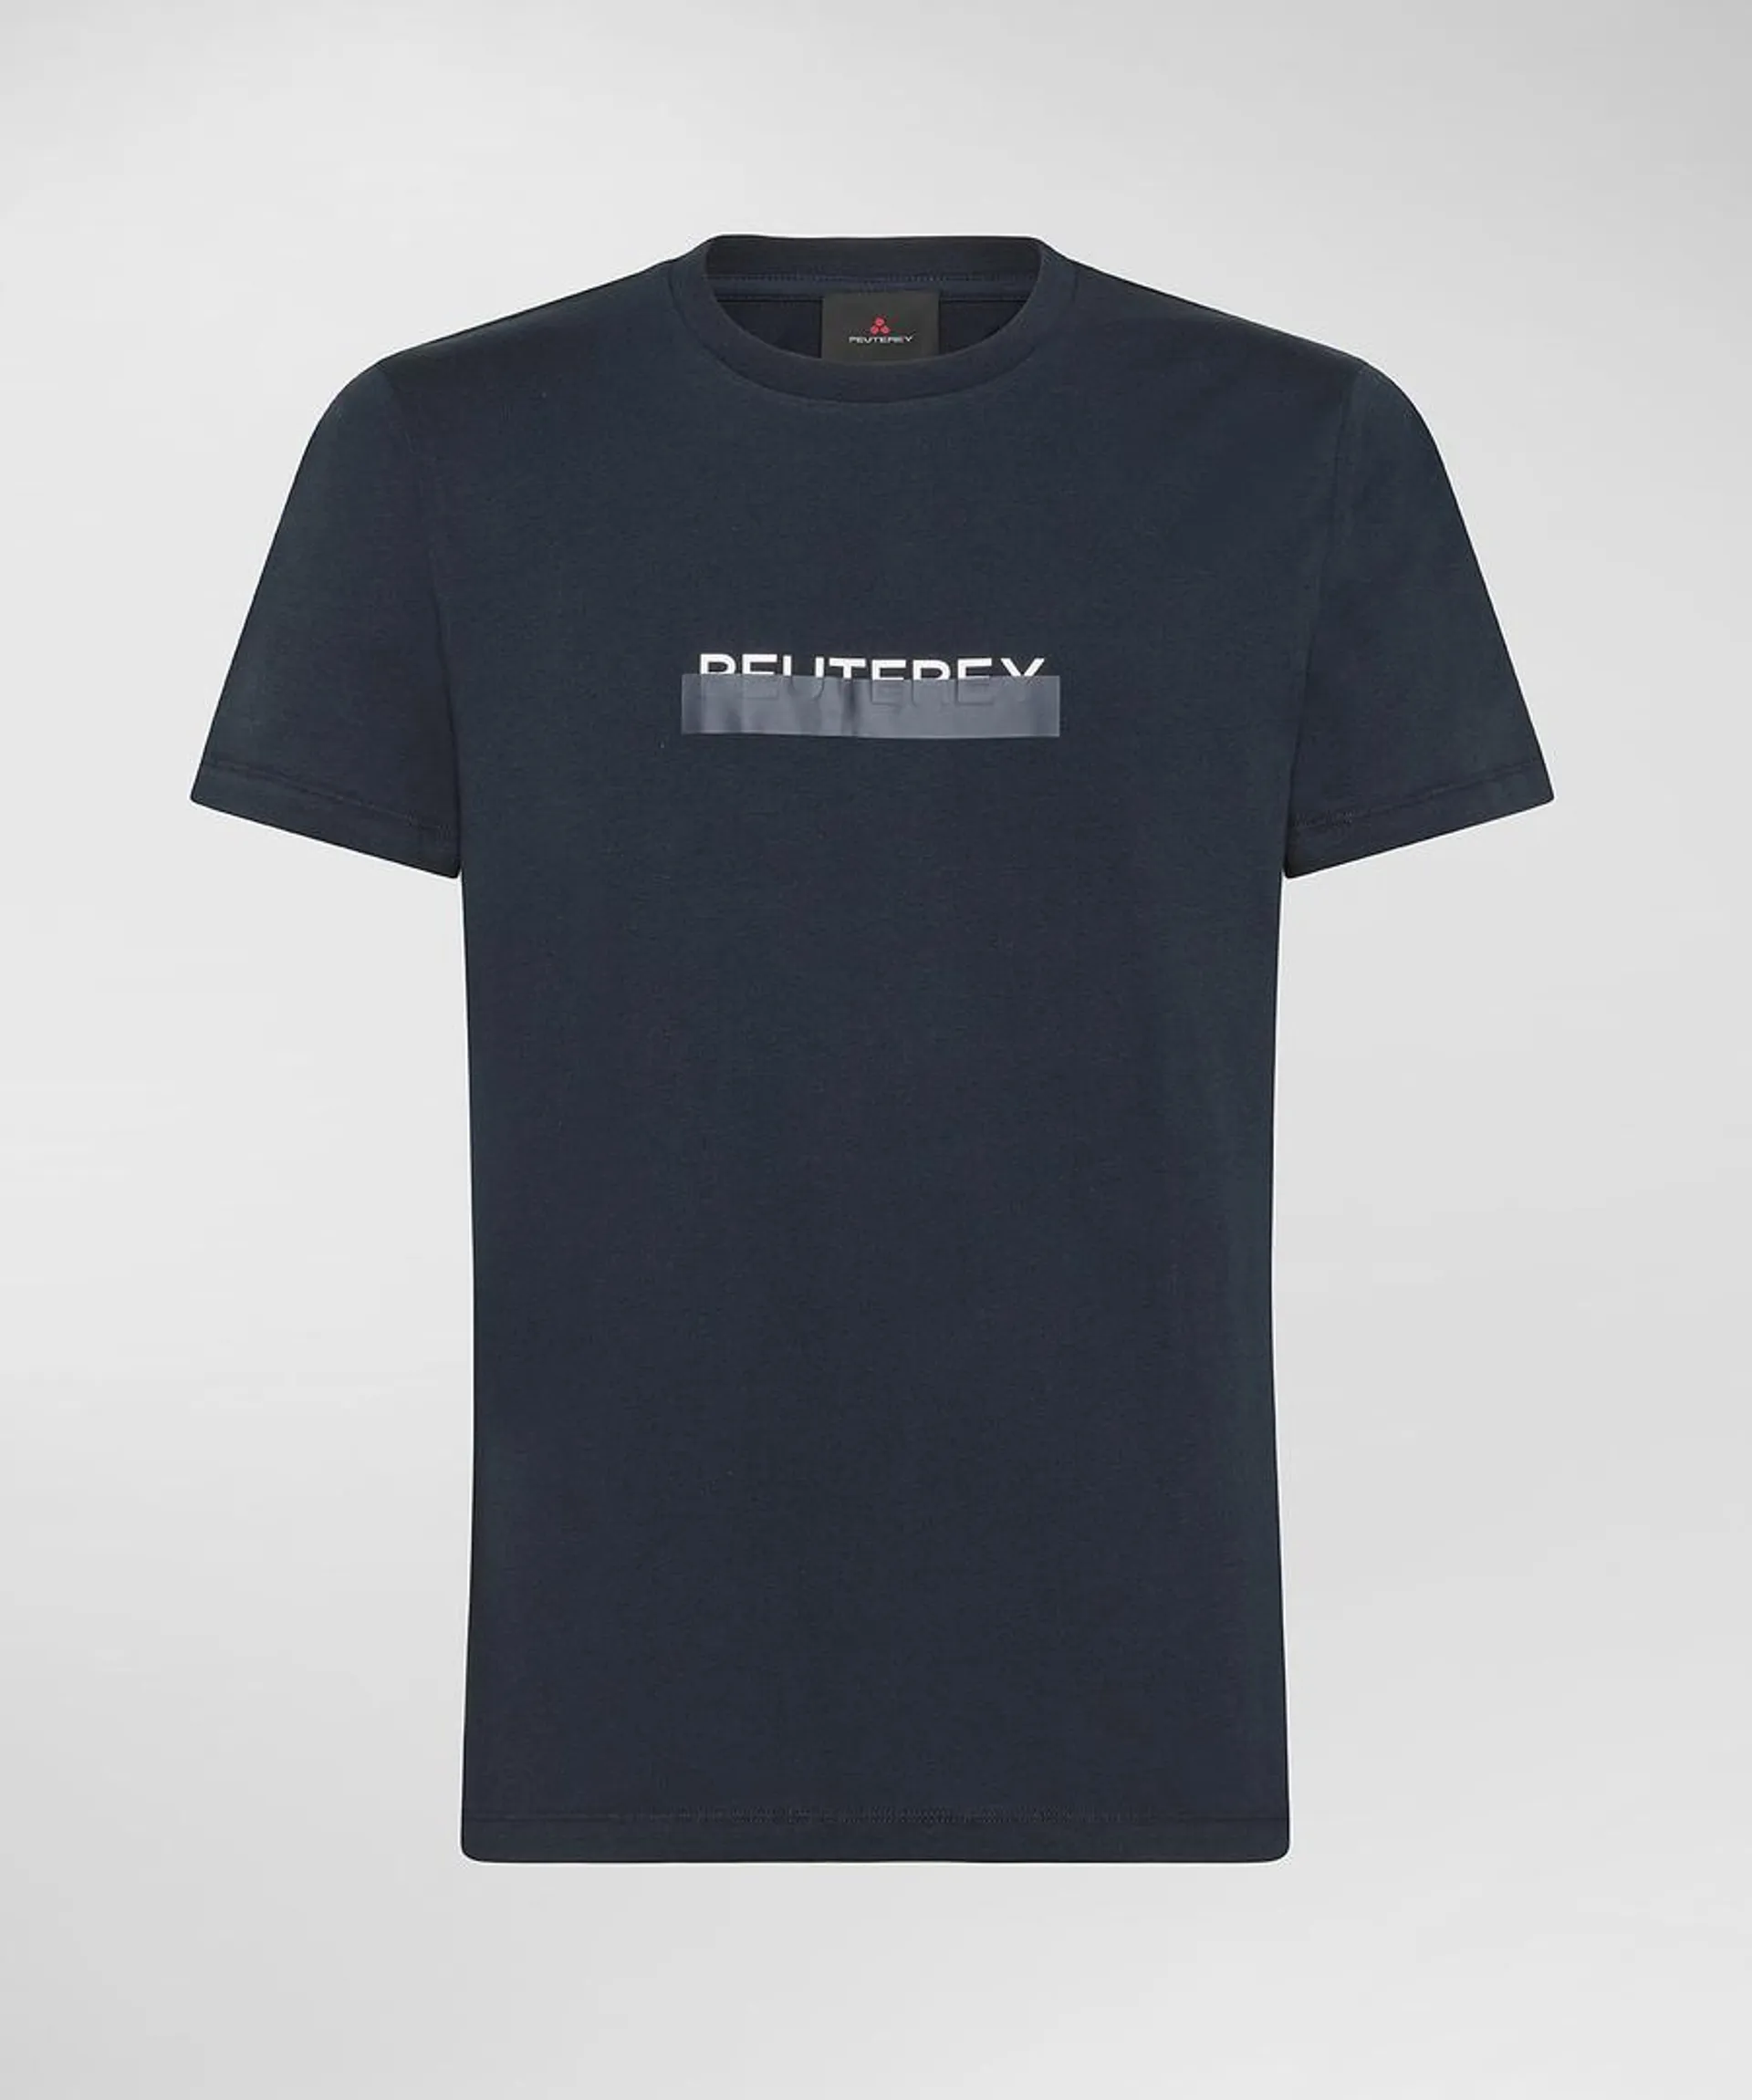 T-Shirt with Peuterey lettering